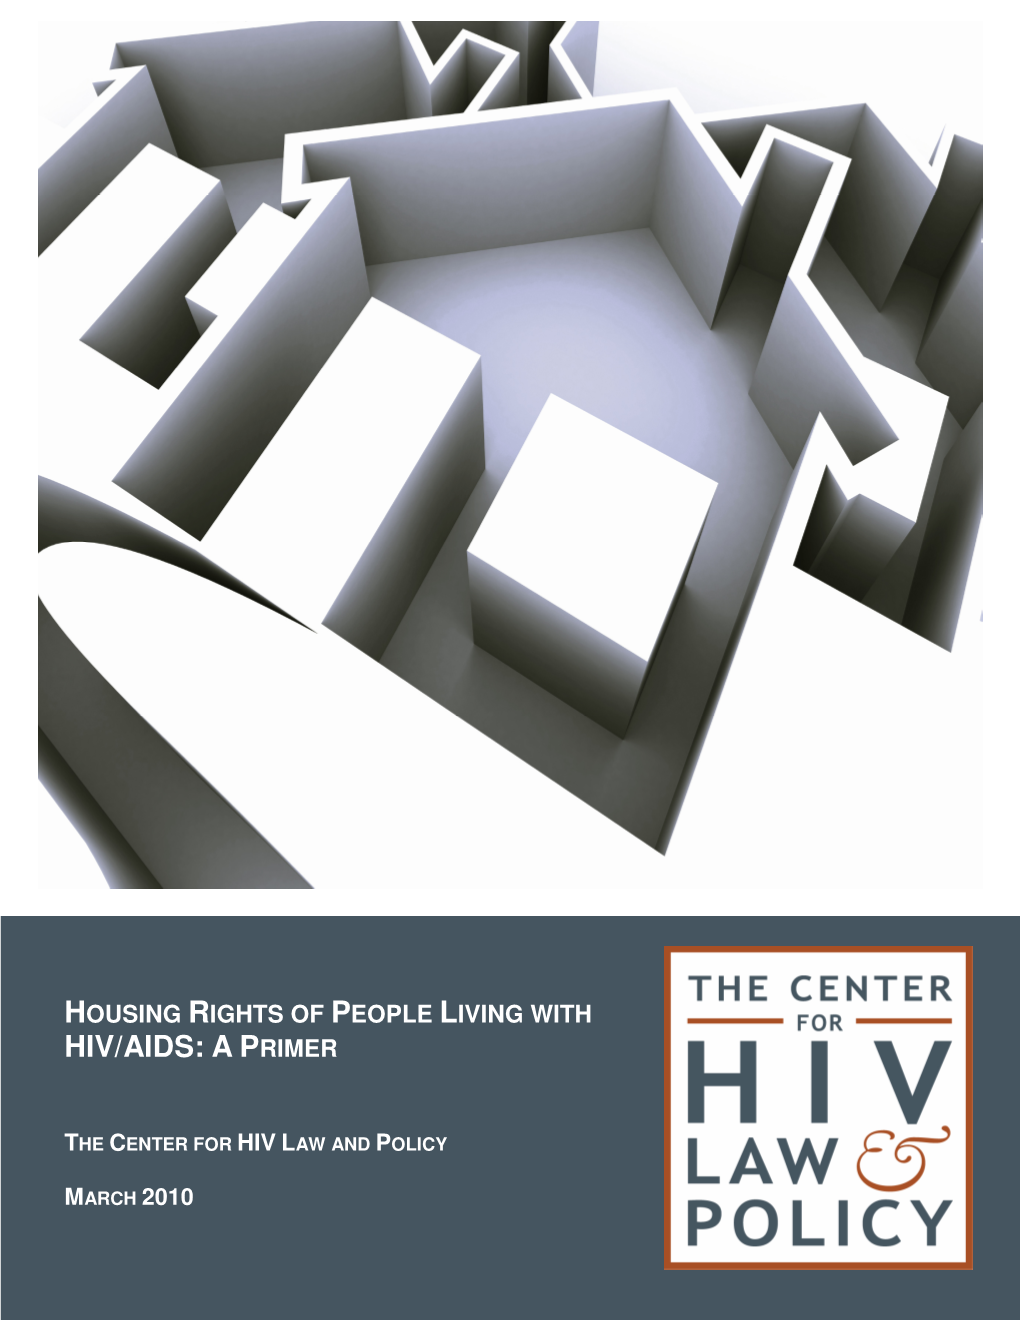 Housing Rights of People Living with Hiv/Aids: a Primer